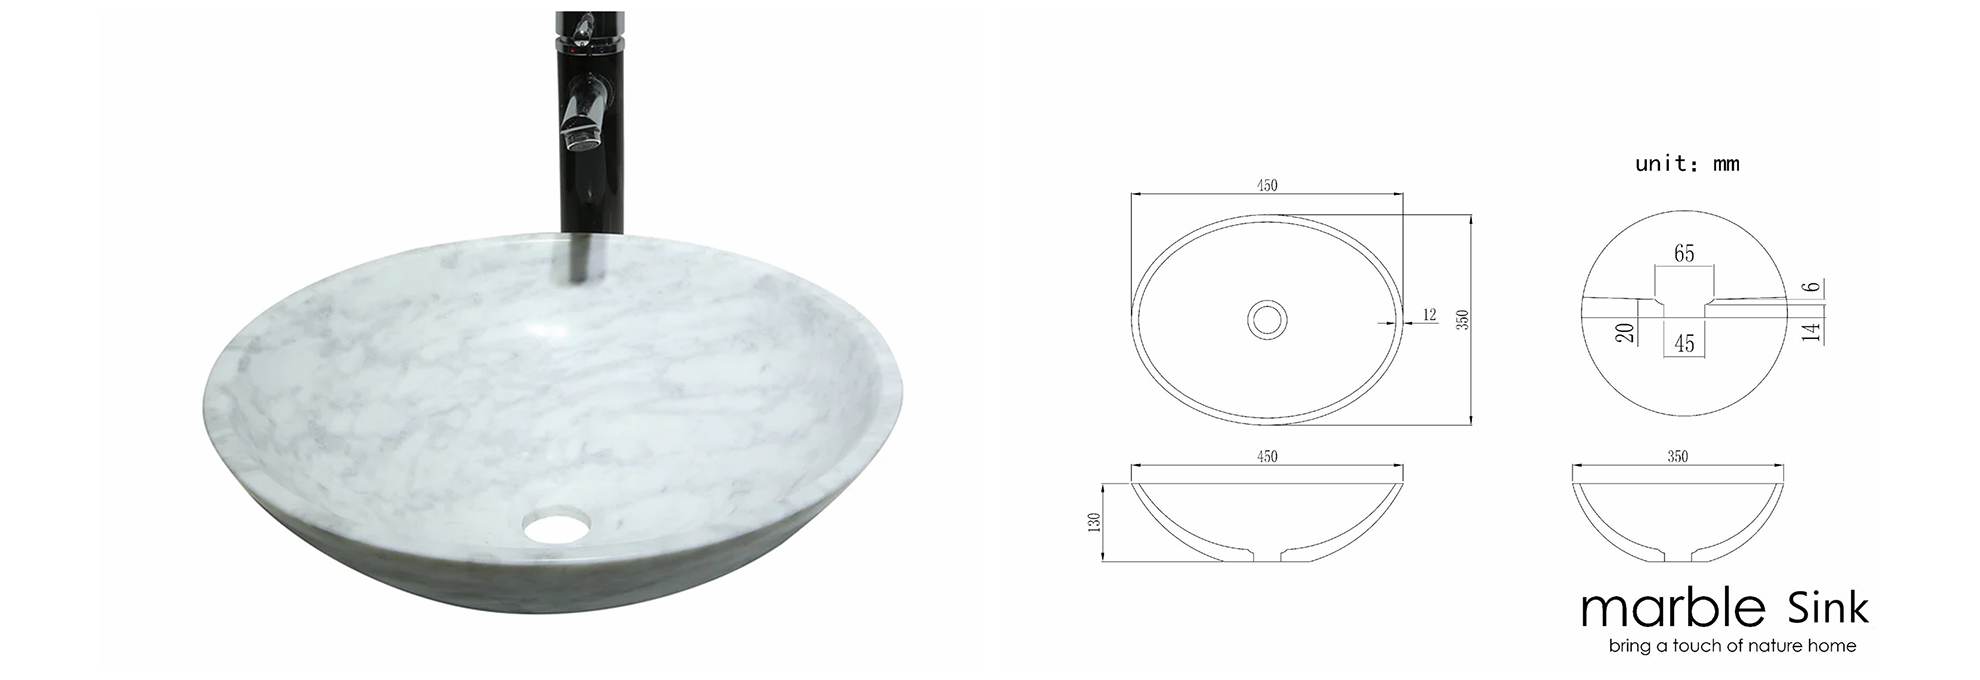 marble sink drawing